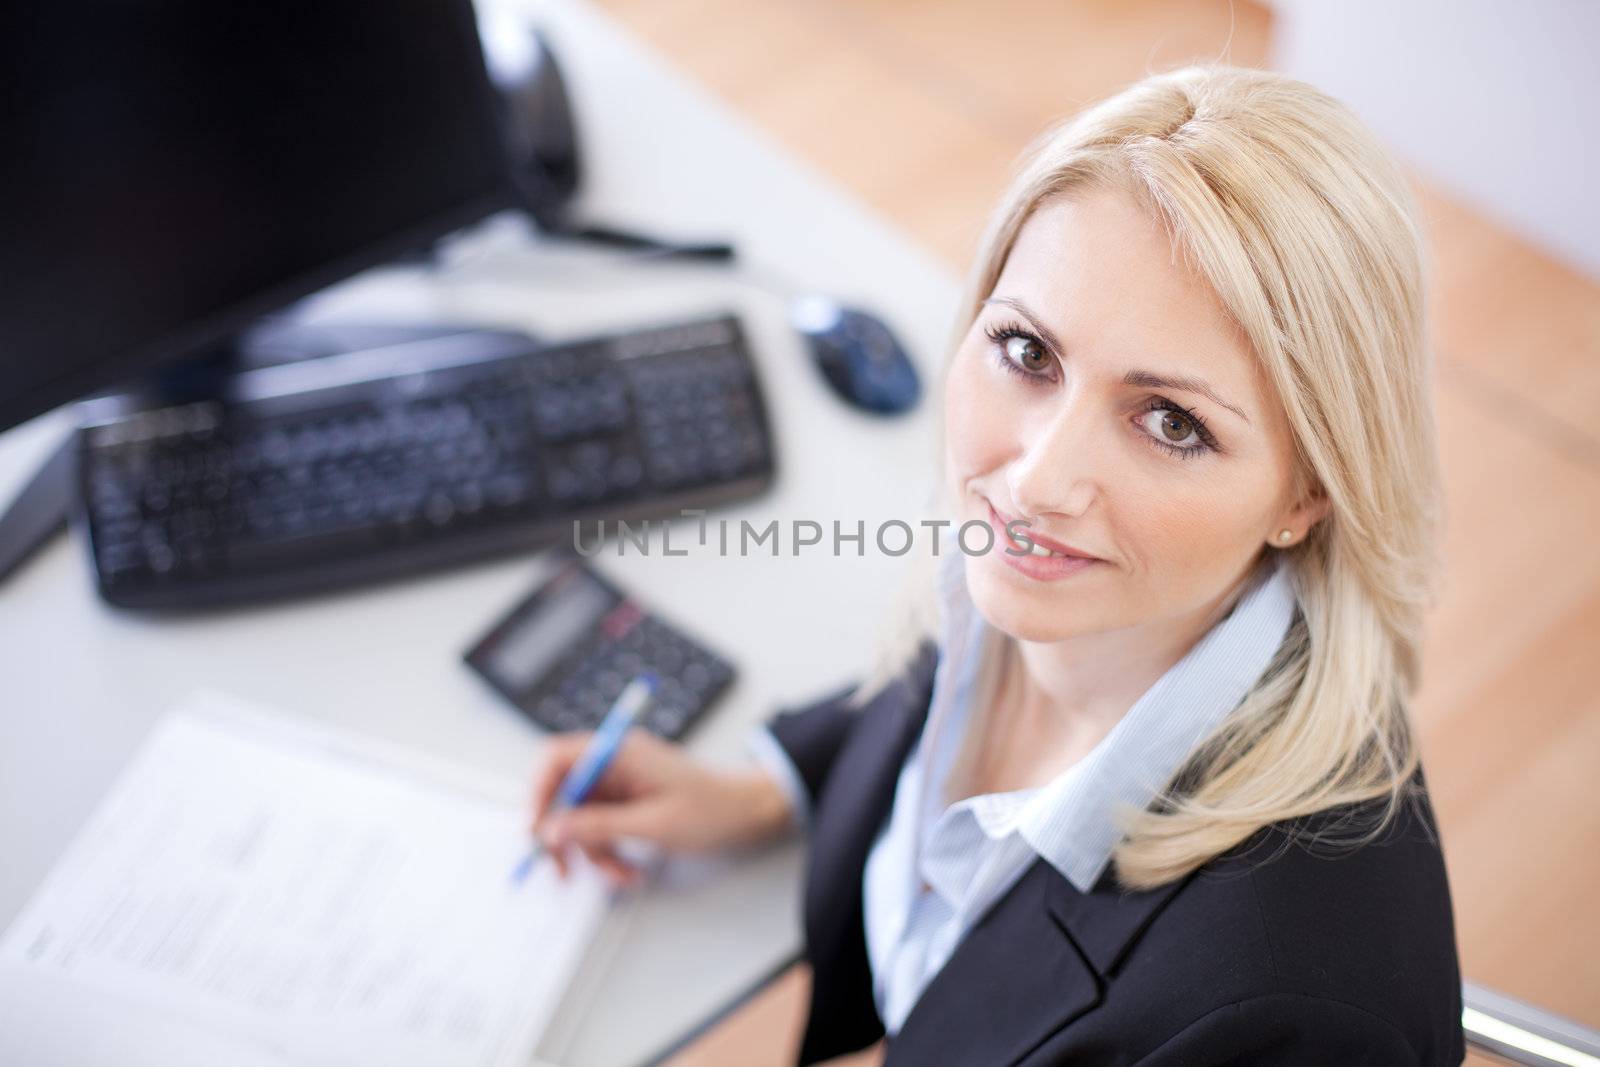 Beautiful businesswoman doing finances in the office